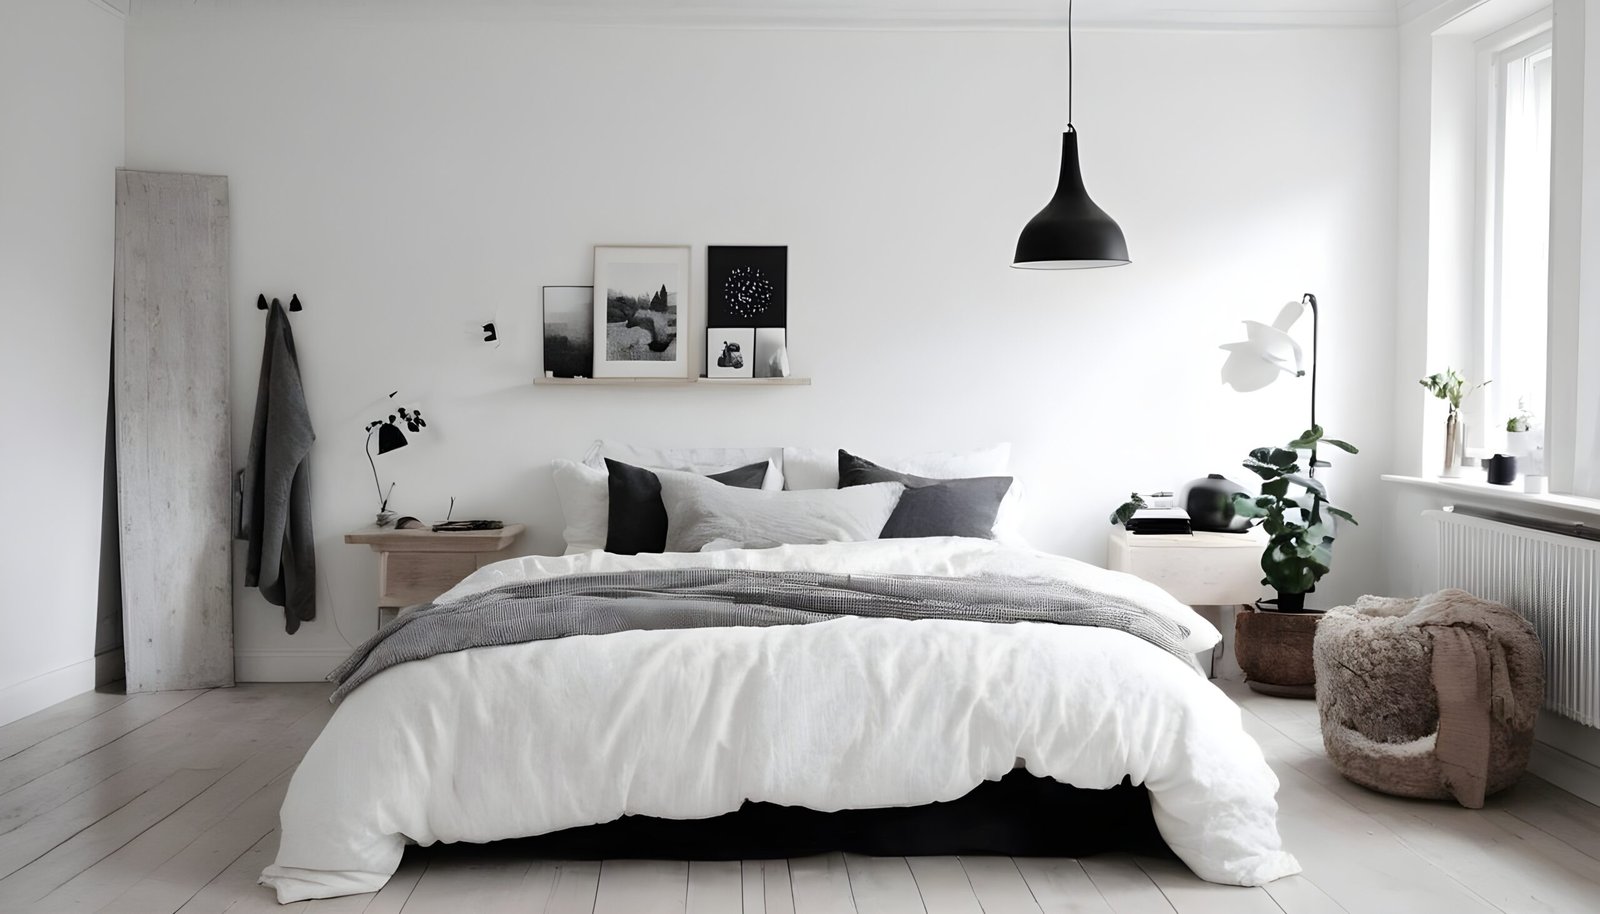 A cozy scandinavian bedroom with lots of pillows and blankets.